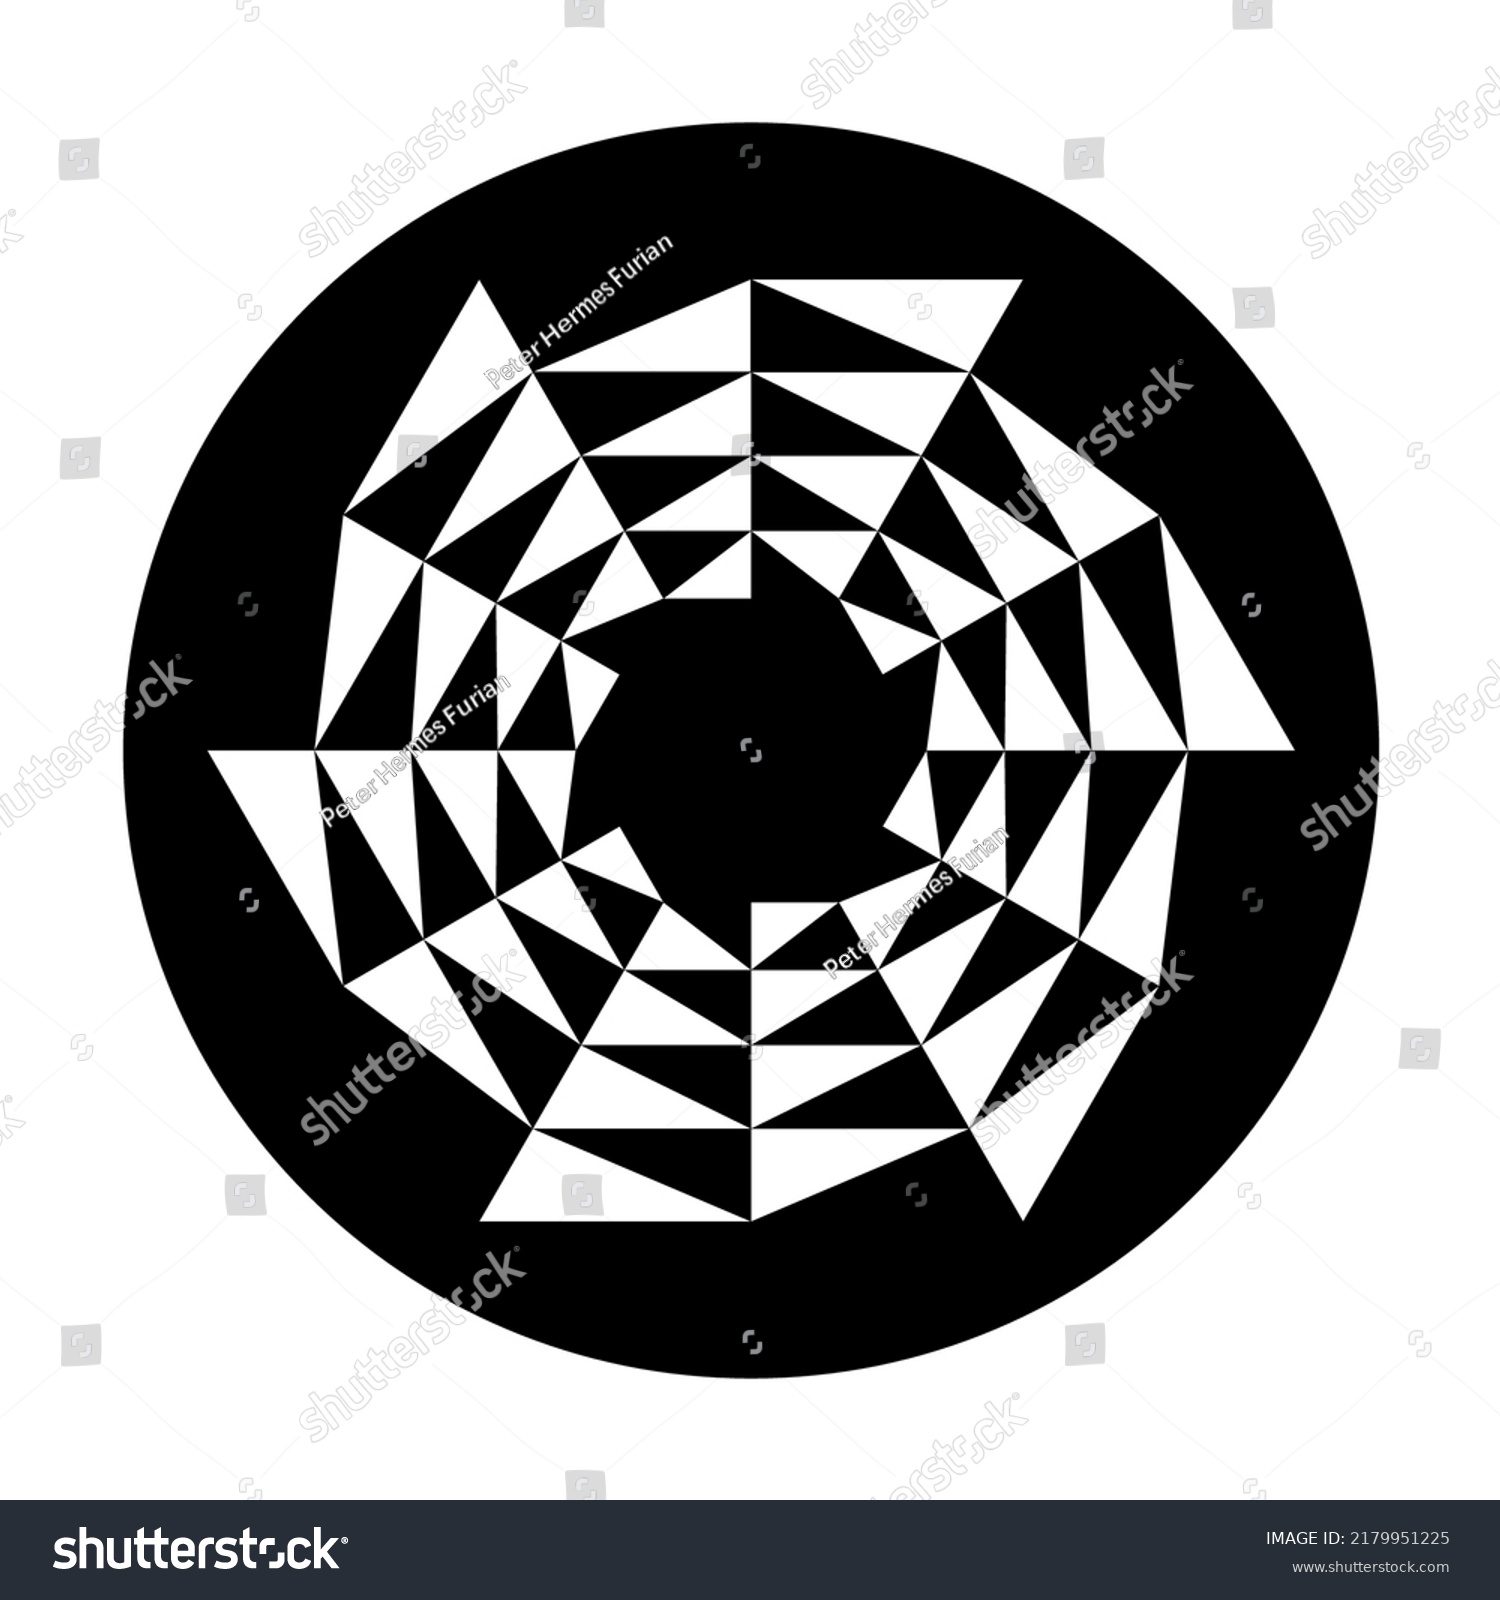 SVG of Star with circular triangle pattern in a black circle. White triangles forming a circular saw blade shape, appearing to move counterclockwise. Modeled on a crop circle pattern found at Barbury Castle. svg